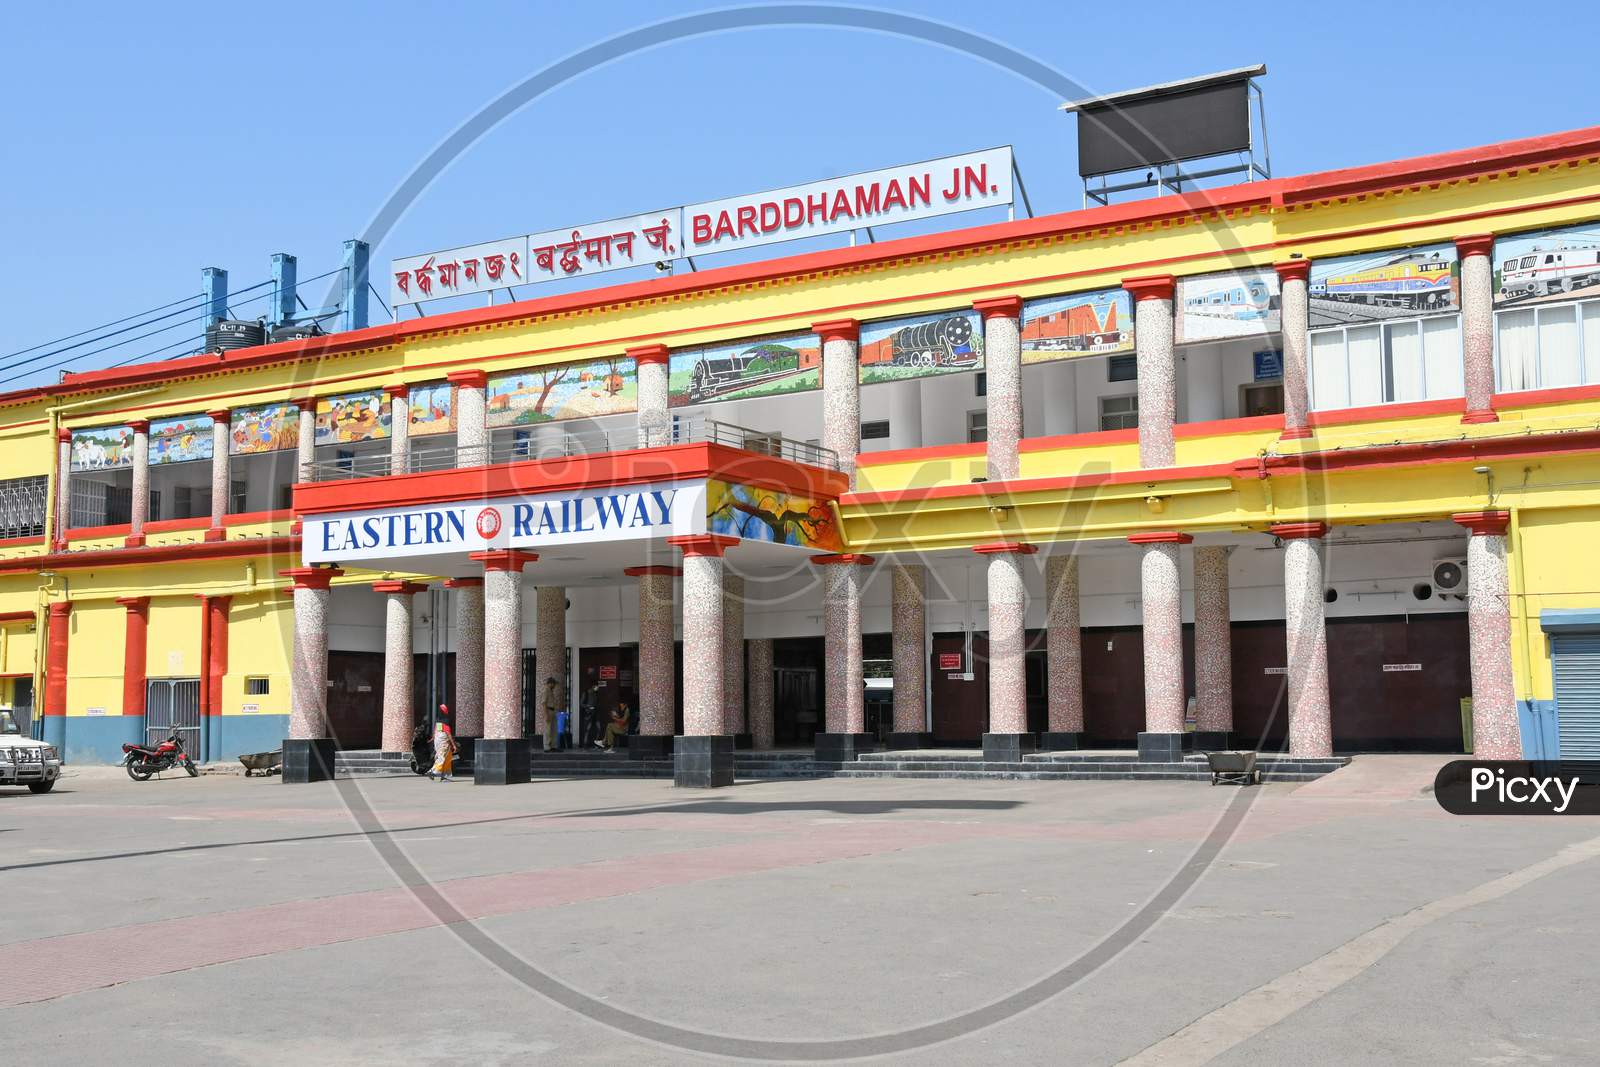 Lockdown - Complete Safety Restrictions have been issued to prevent Novel Coronavirus. Completely closed Bardhaman Junction Railway Station.